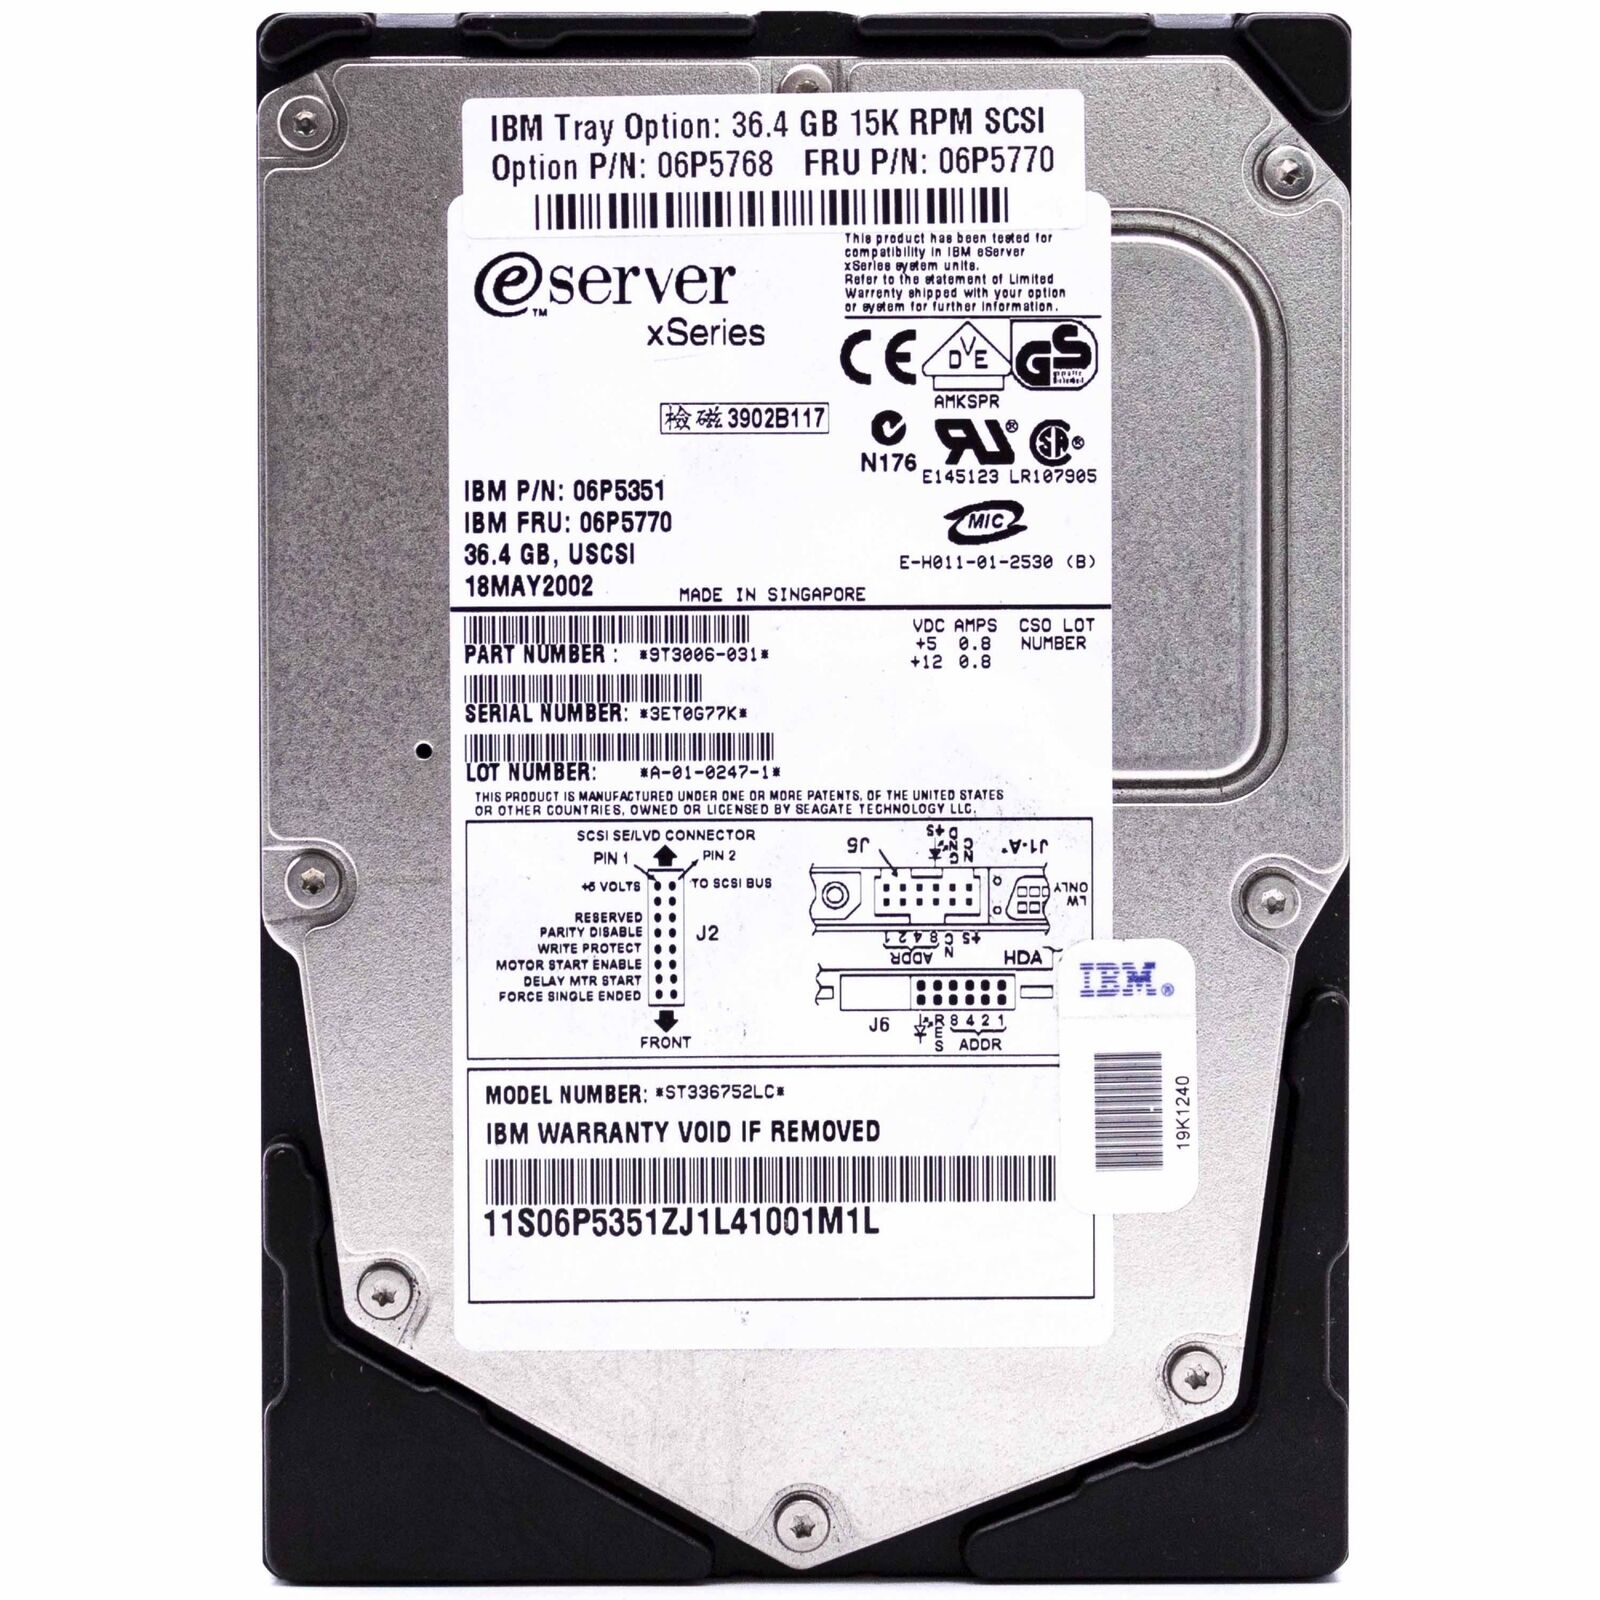 Seagate ST336752LC HDD Hard Disk SCSI 36.4GB 80PIN 3,5” Server